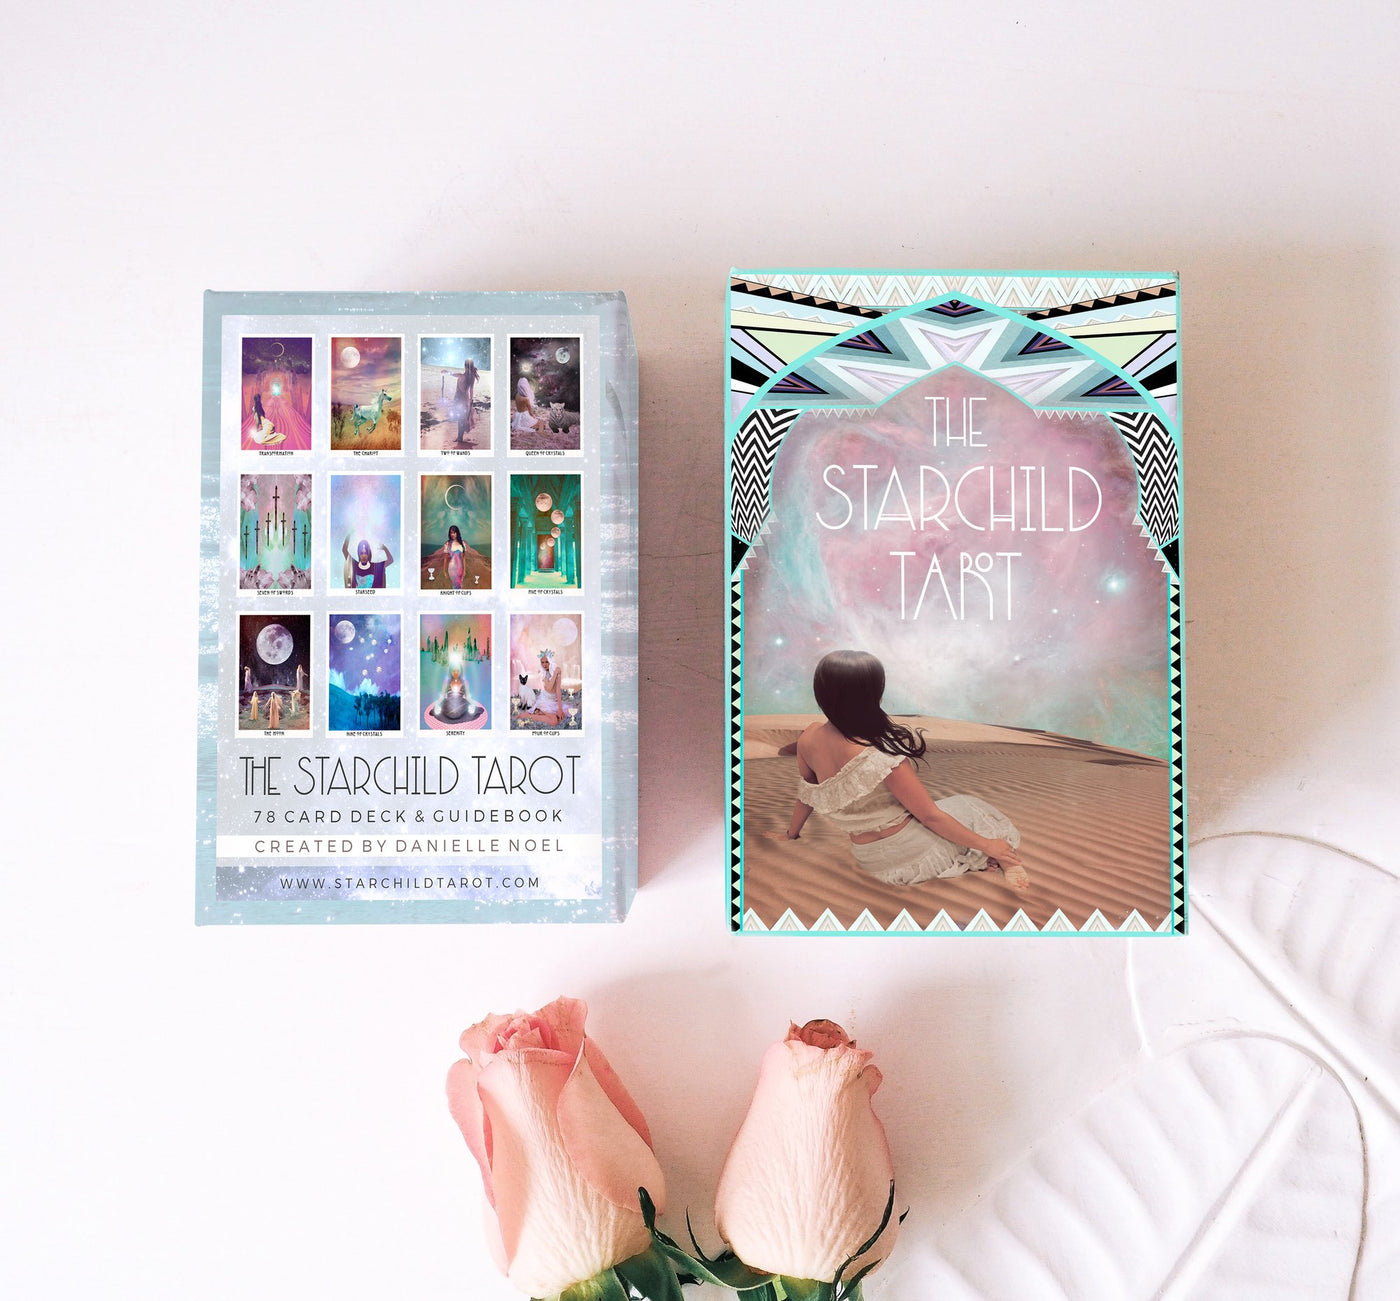 The Starchild Tarot 1st Edition - Classic Turquoise by Danielle Noel